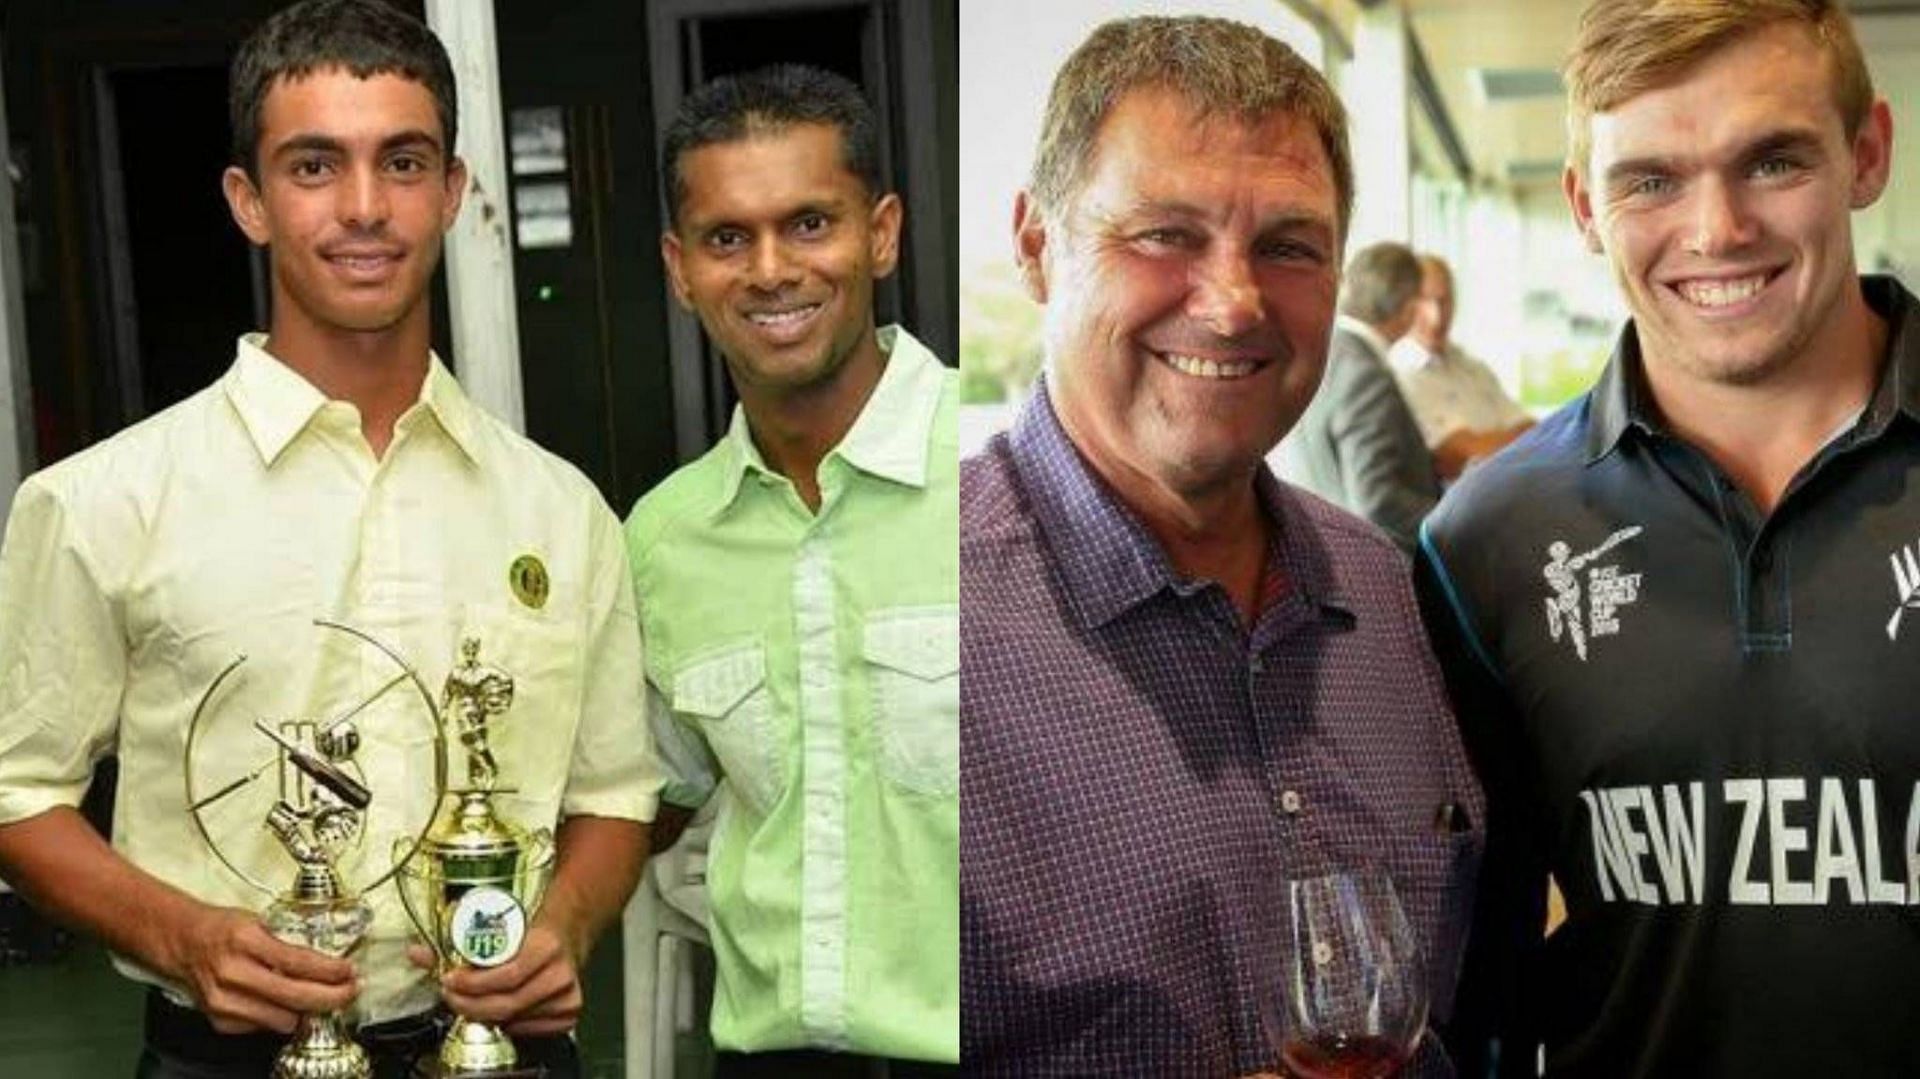 Tom Latham with his father, Shivnarine Chanderpaul with his son